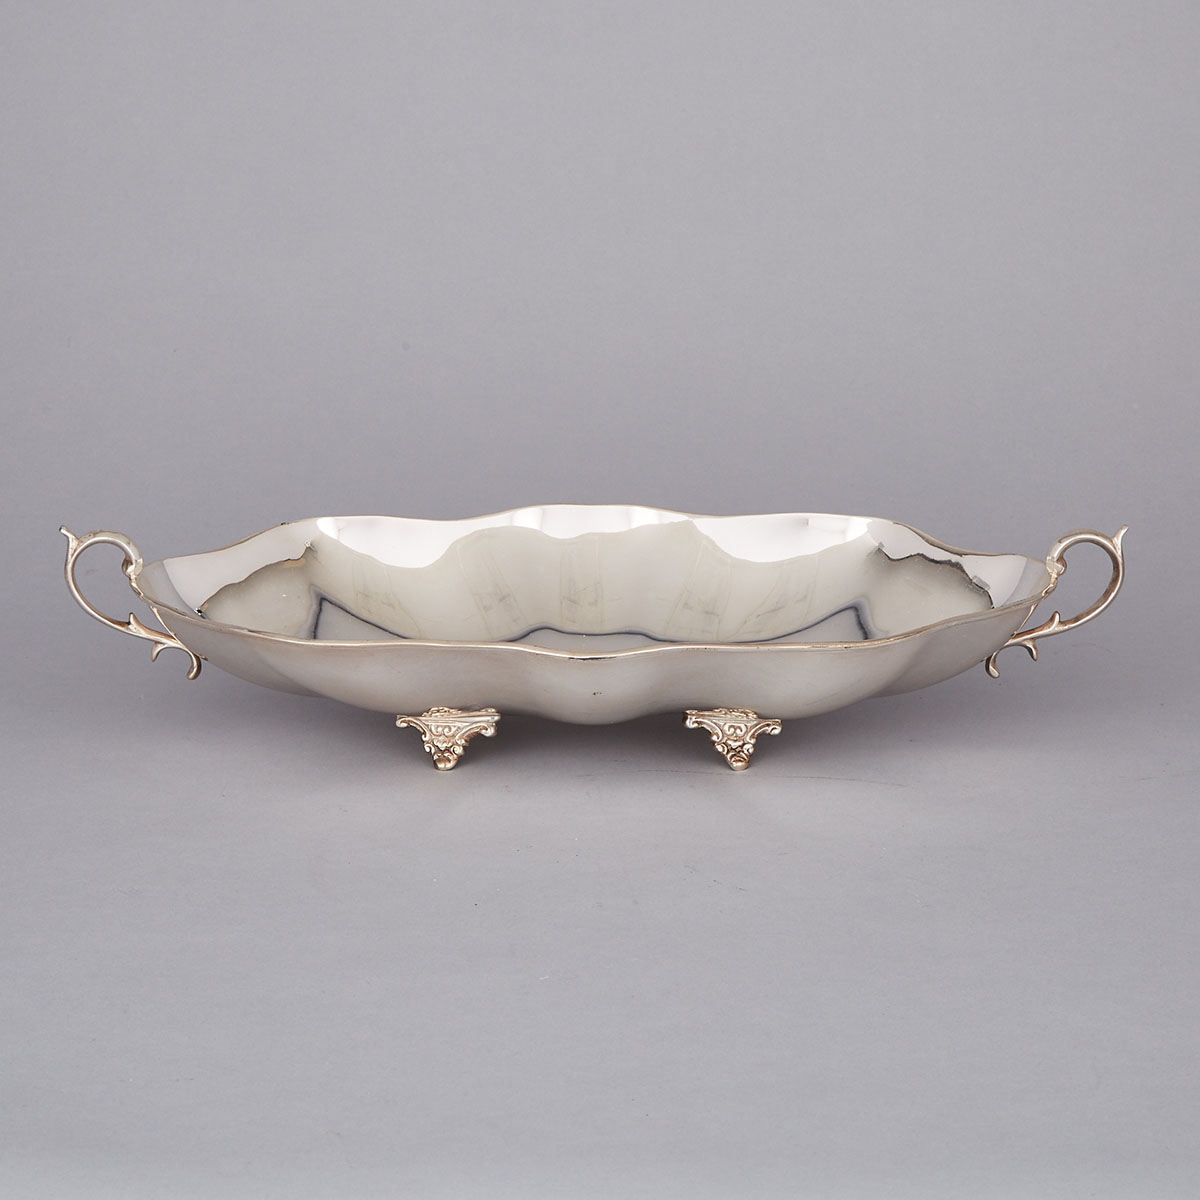 Mexican Silver Shaped Oval Two-Handled Bowl, Sanchez Bros., Mexico City, 20th century